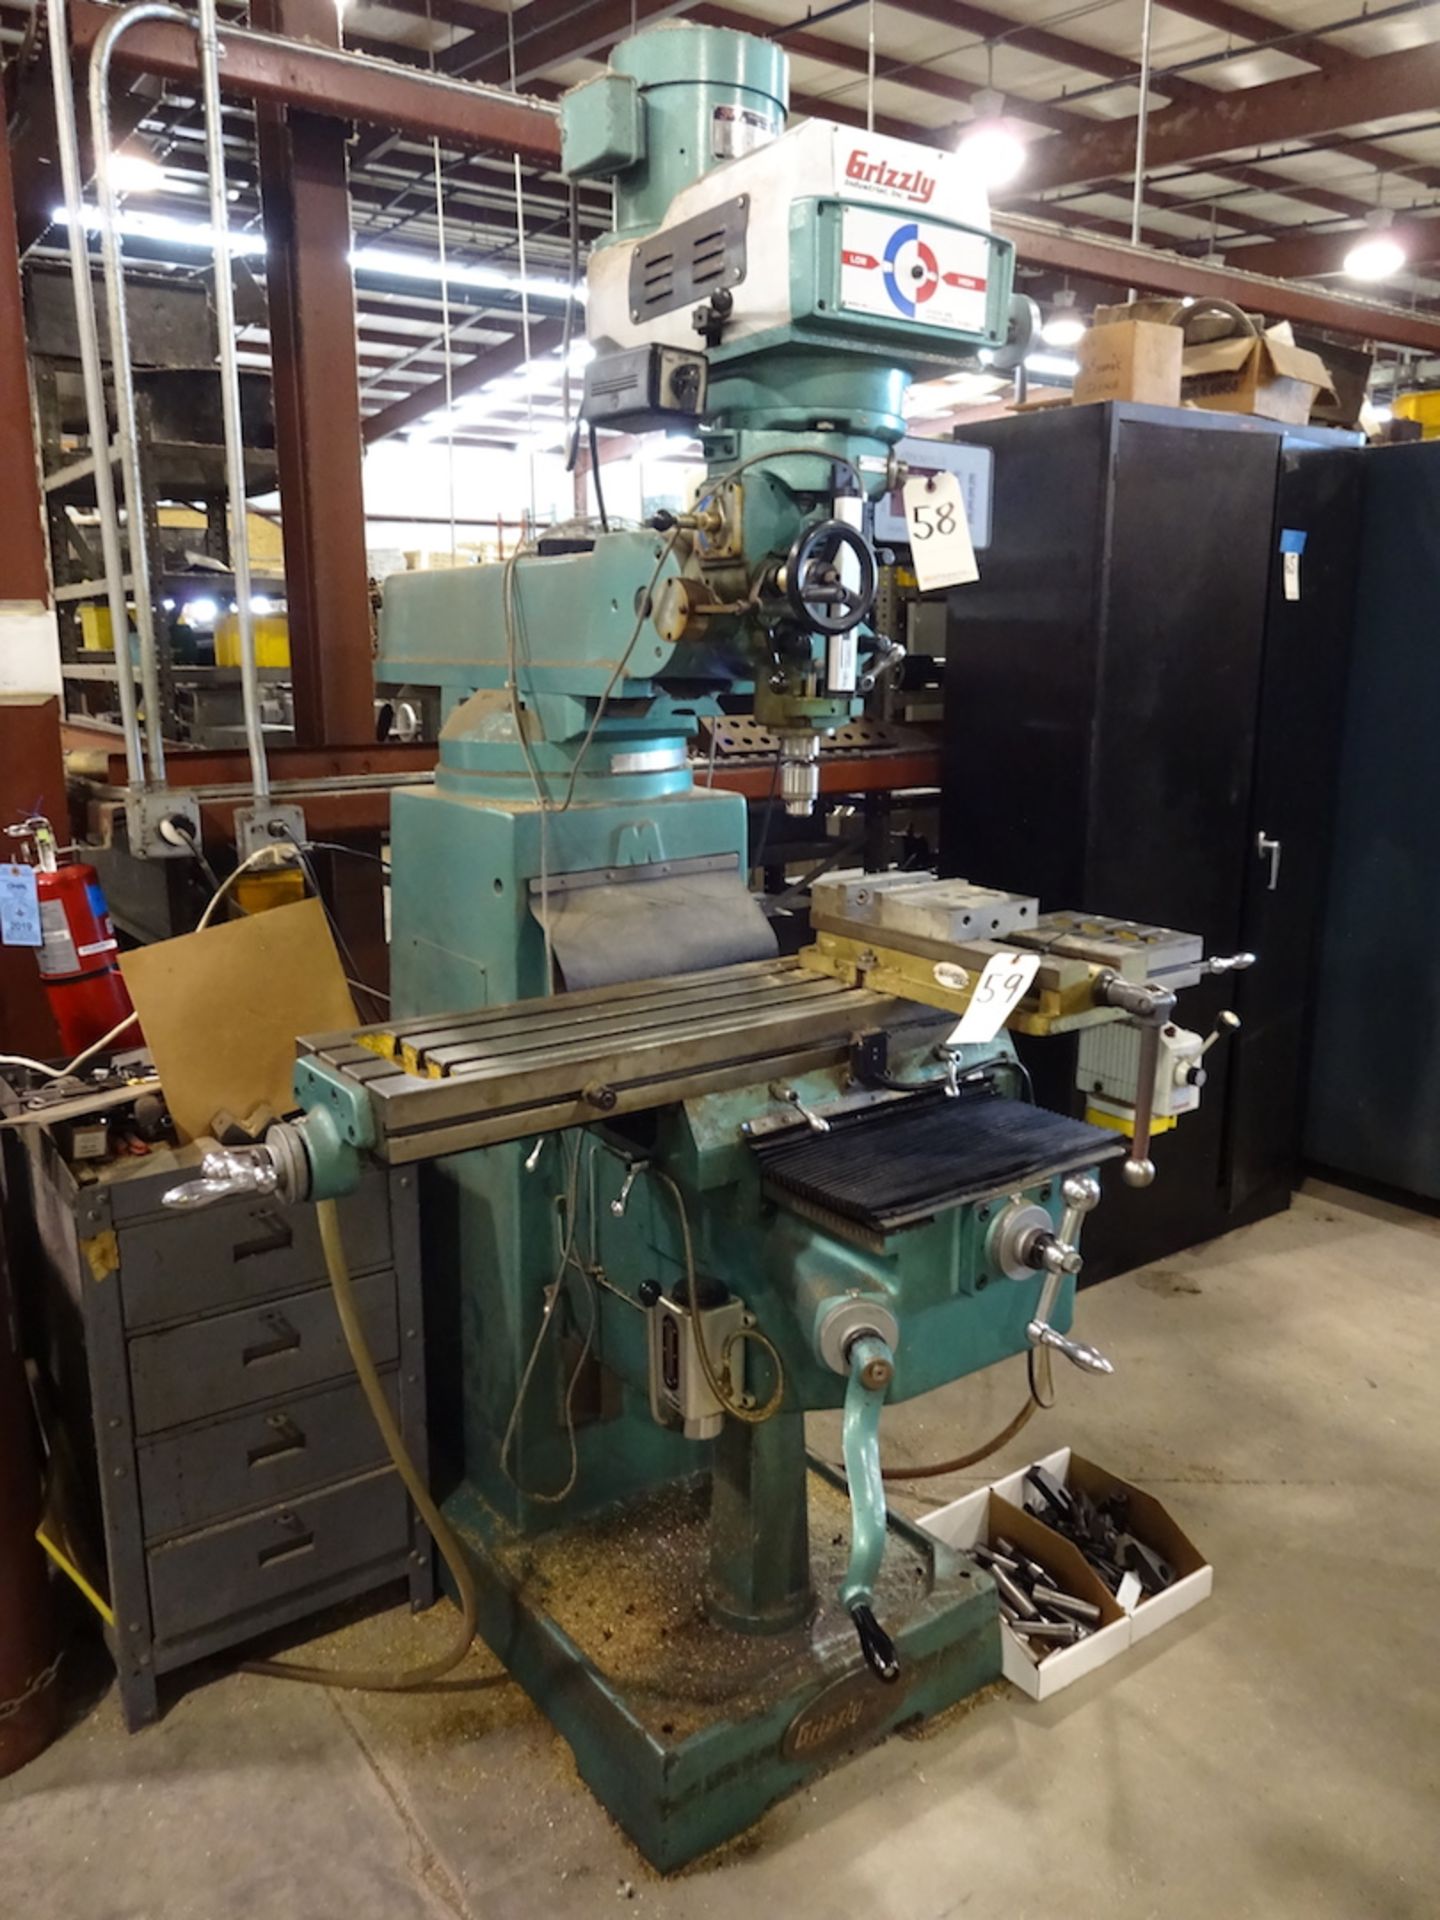 Grizzly 3 HP Model G4029 Vertical Milling Machine, S/N 822783, 50 in. x 10 in. T-Slot Table, Power - Image 2 of 7